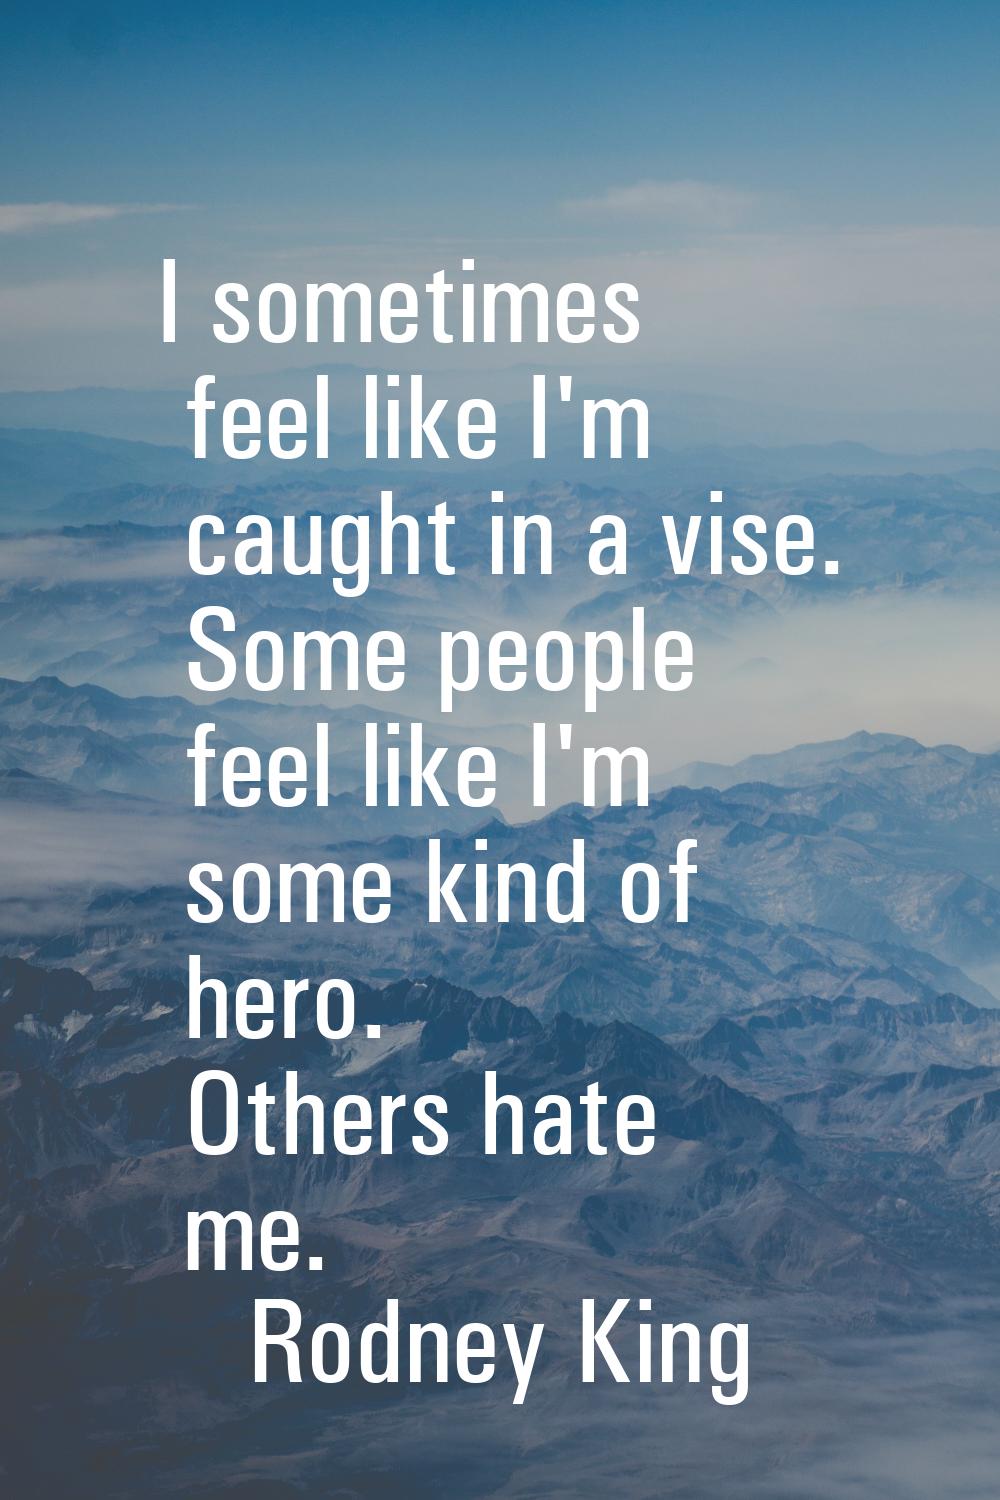 I sometimes feel like I'm caught in a vise. Some people feel like I'm some kind of hero. Others hat